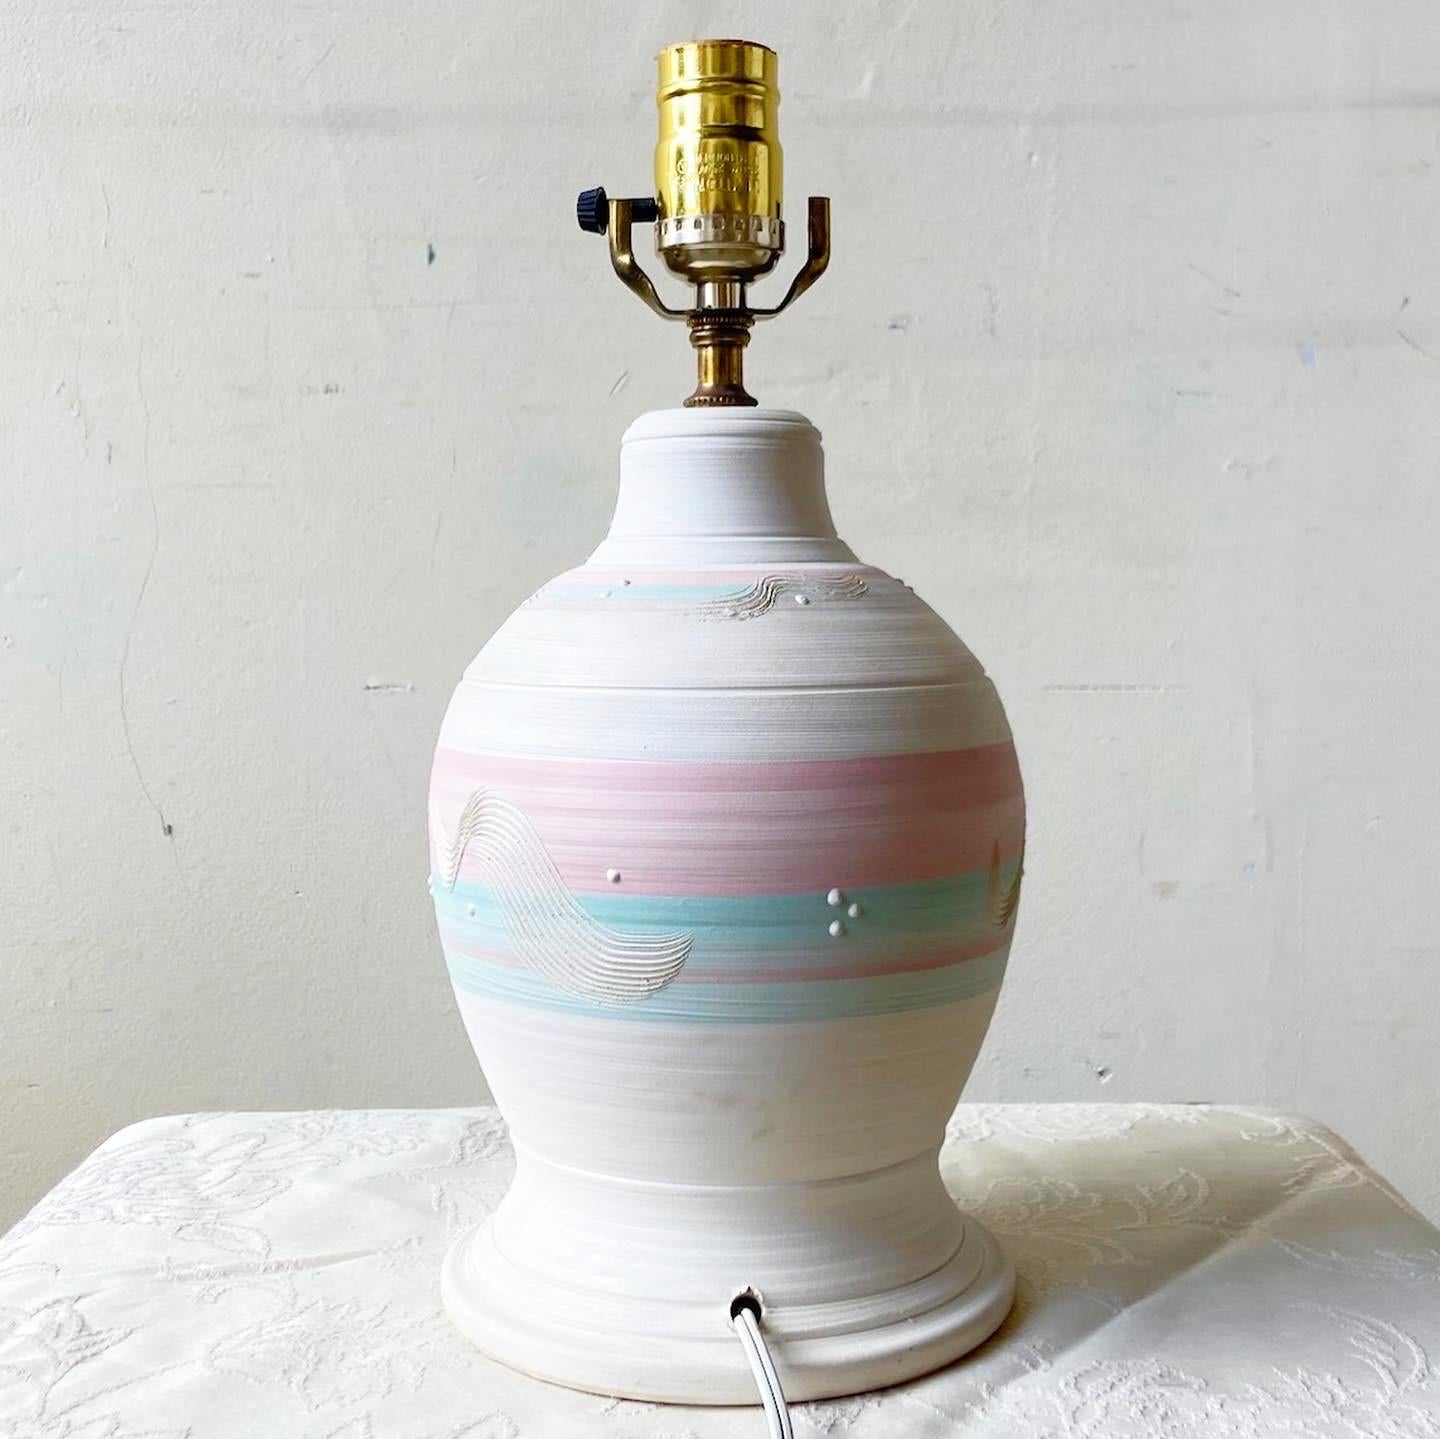 Exceptional postmodern sculpted pottery table lamp. Feasted a fantastic pink and green finish.

Additional information:
Material: Pottery
Color: Pink
Style: Postmodern
Time Period: 1980s
Place of origin: USA
Dimension: 6